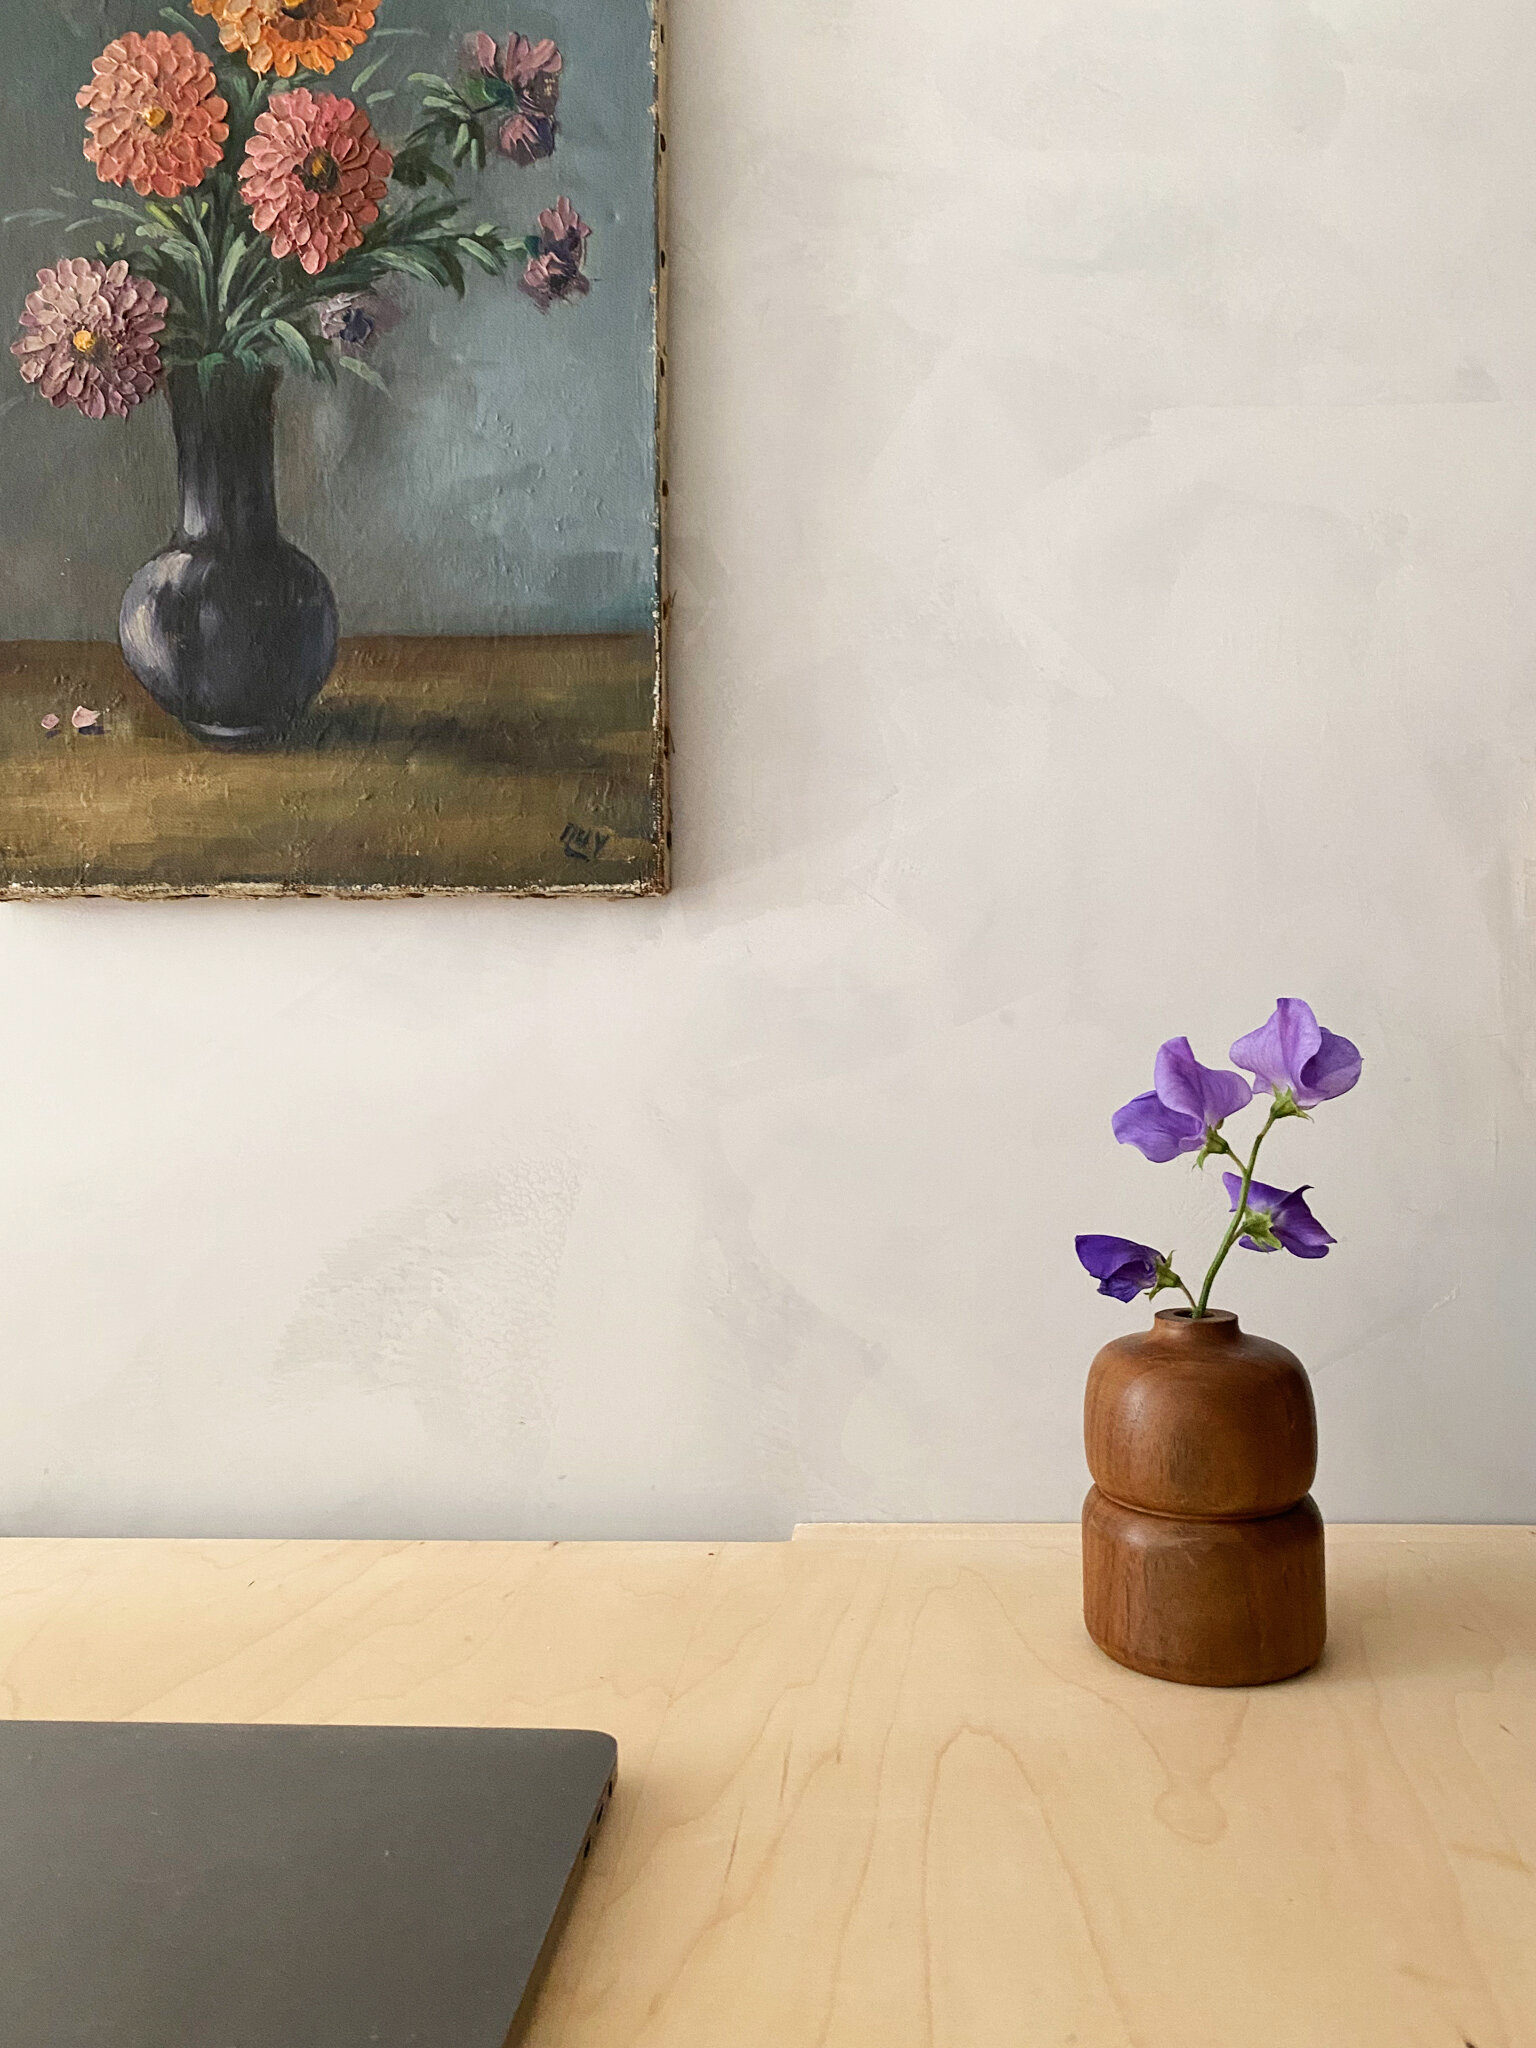  A moody floral vintage oil painting from Bay Area favorite Elsie Green helps add depth and texture  